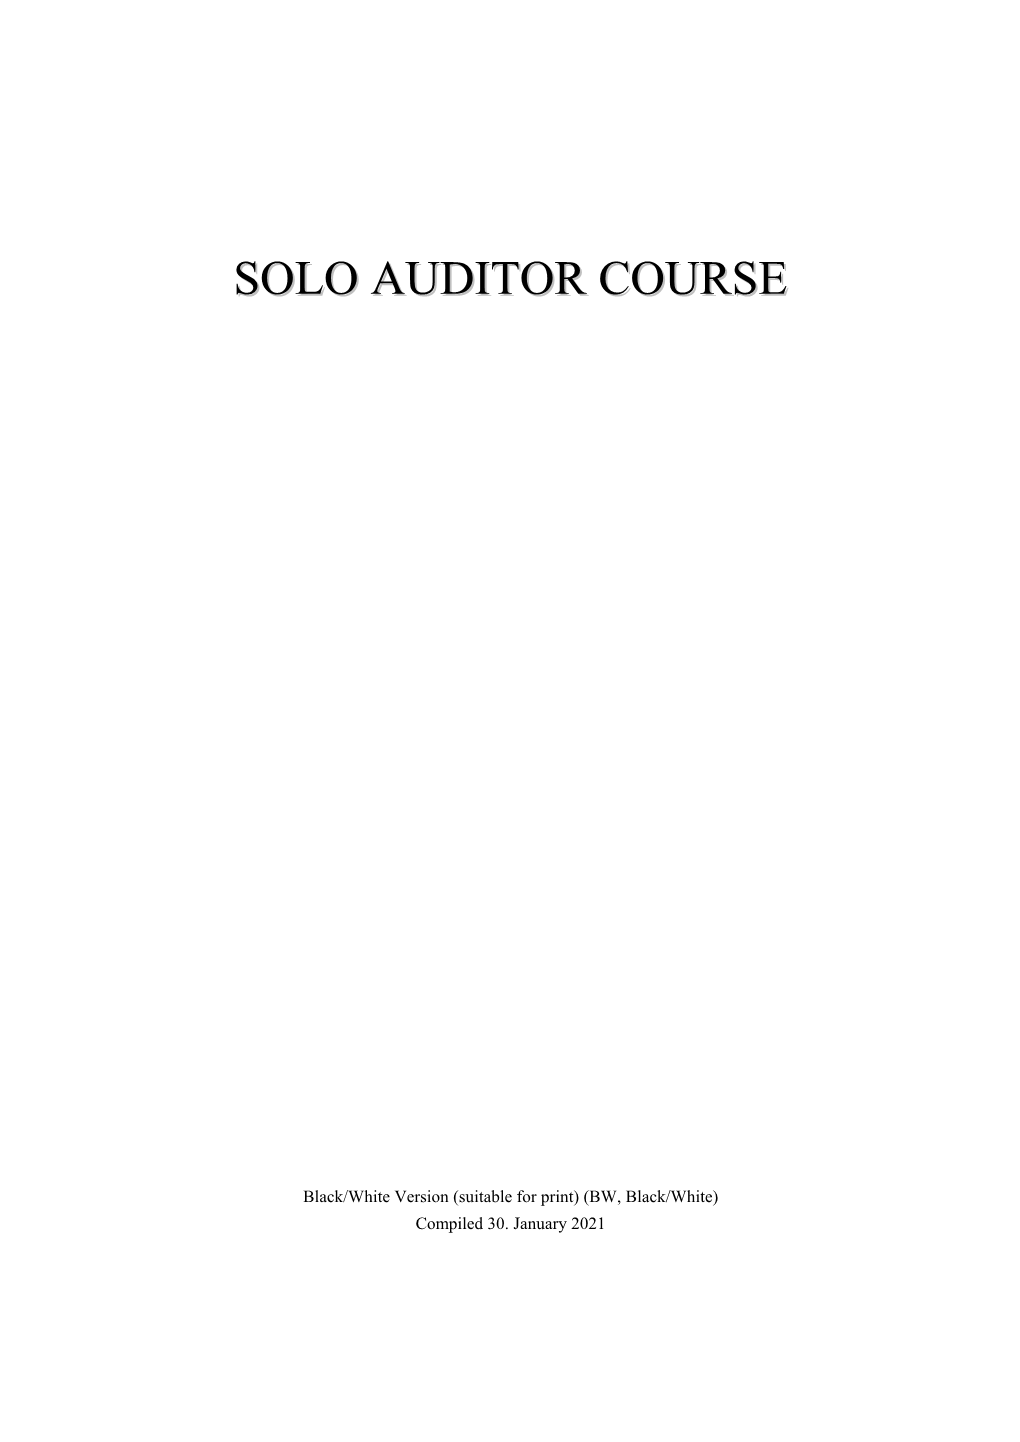 SOLO AUDITOR COURSE II 30.01.21 A) Table of Contents, in Checksheet Order